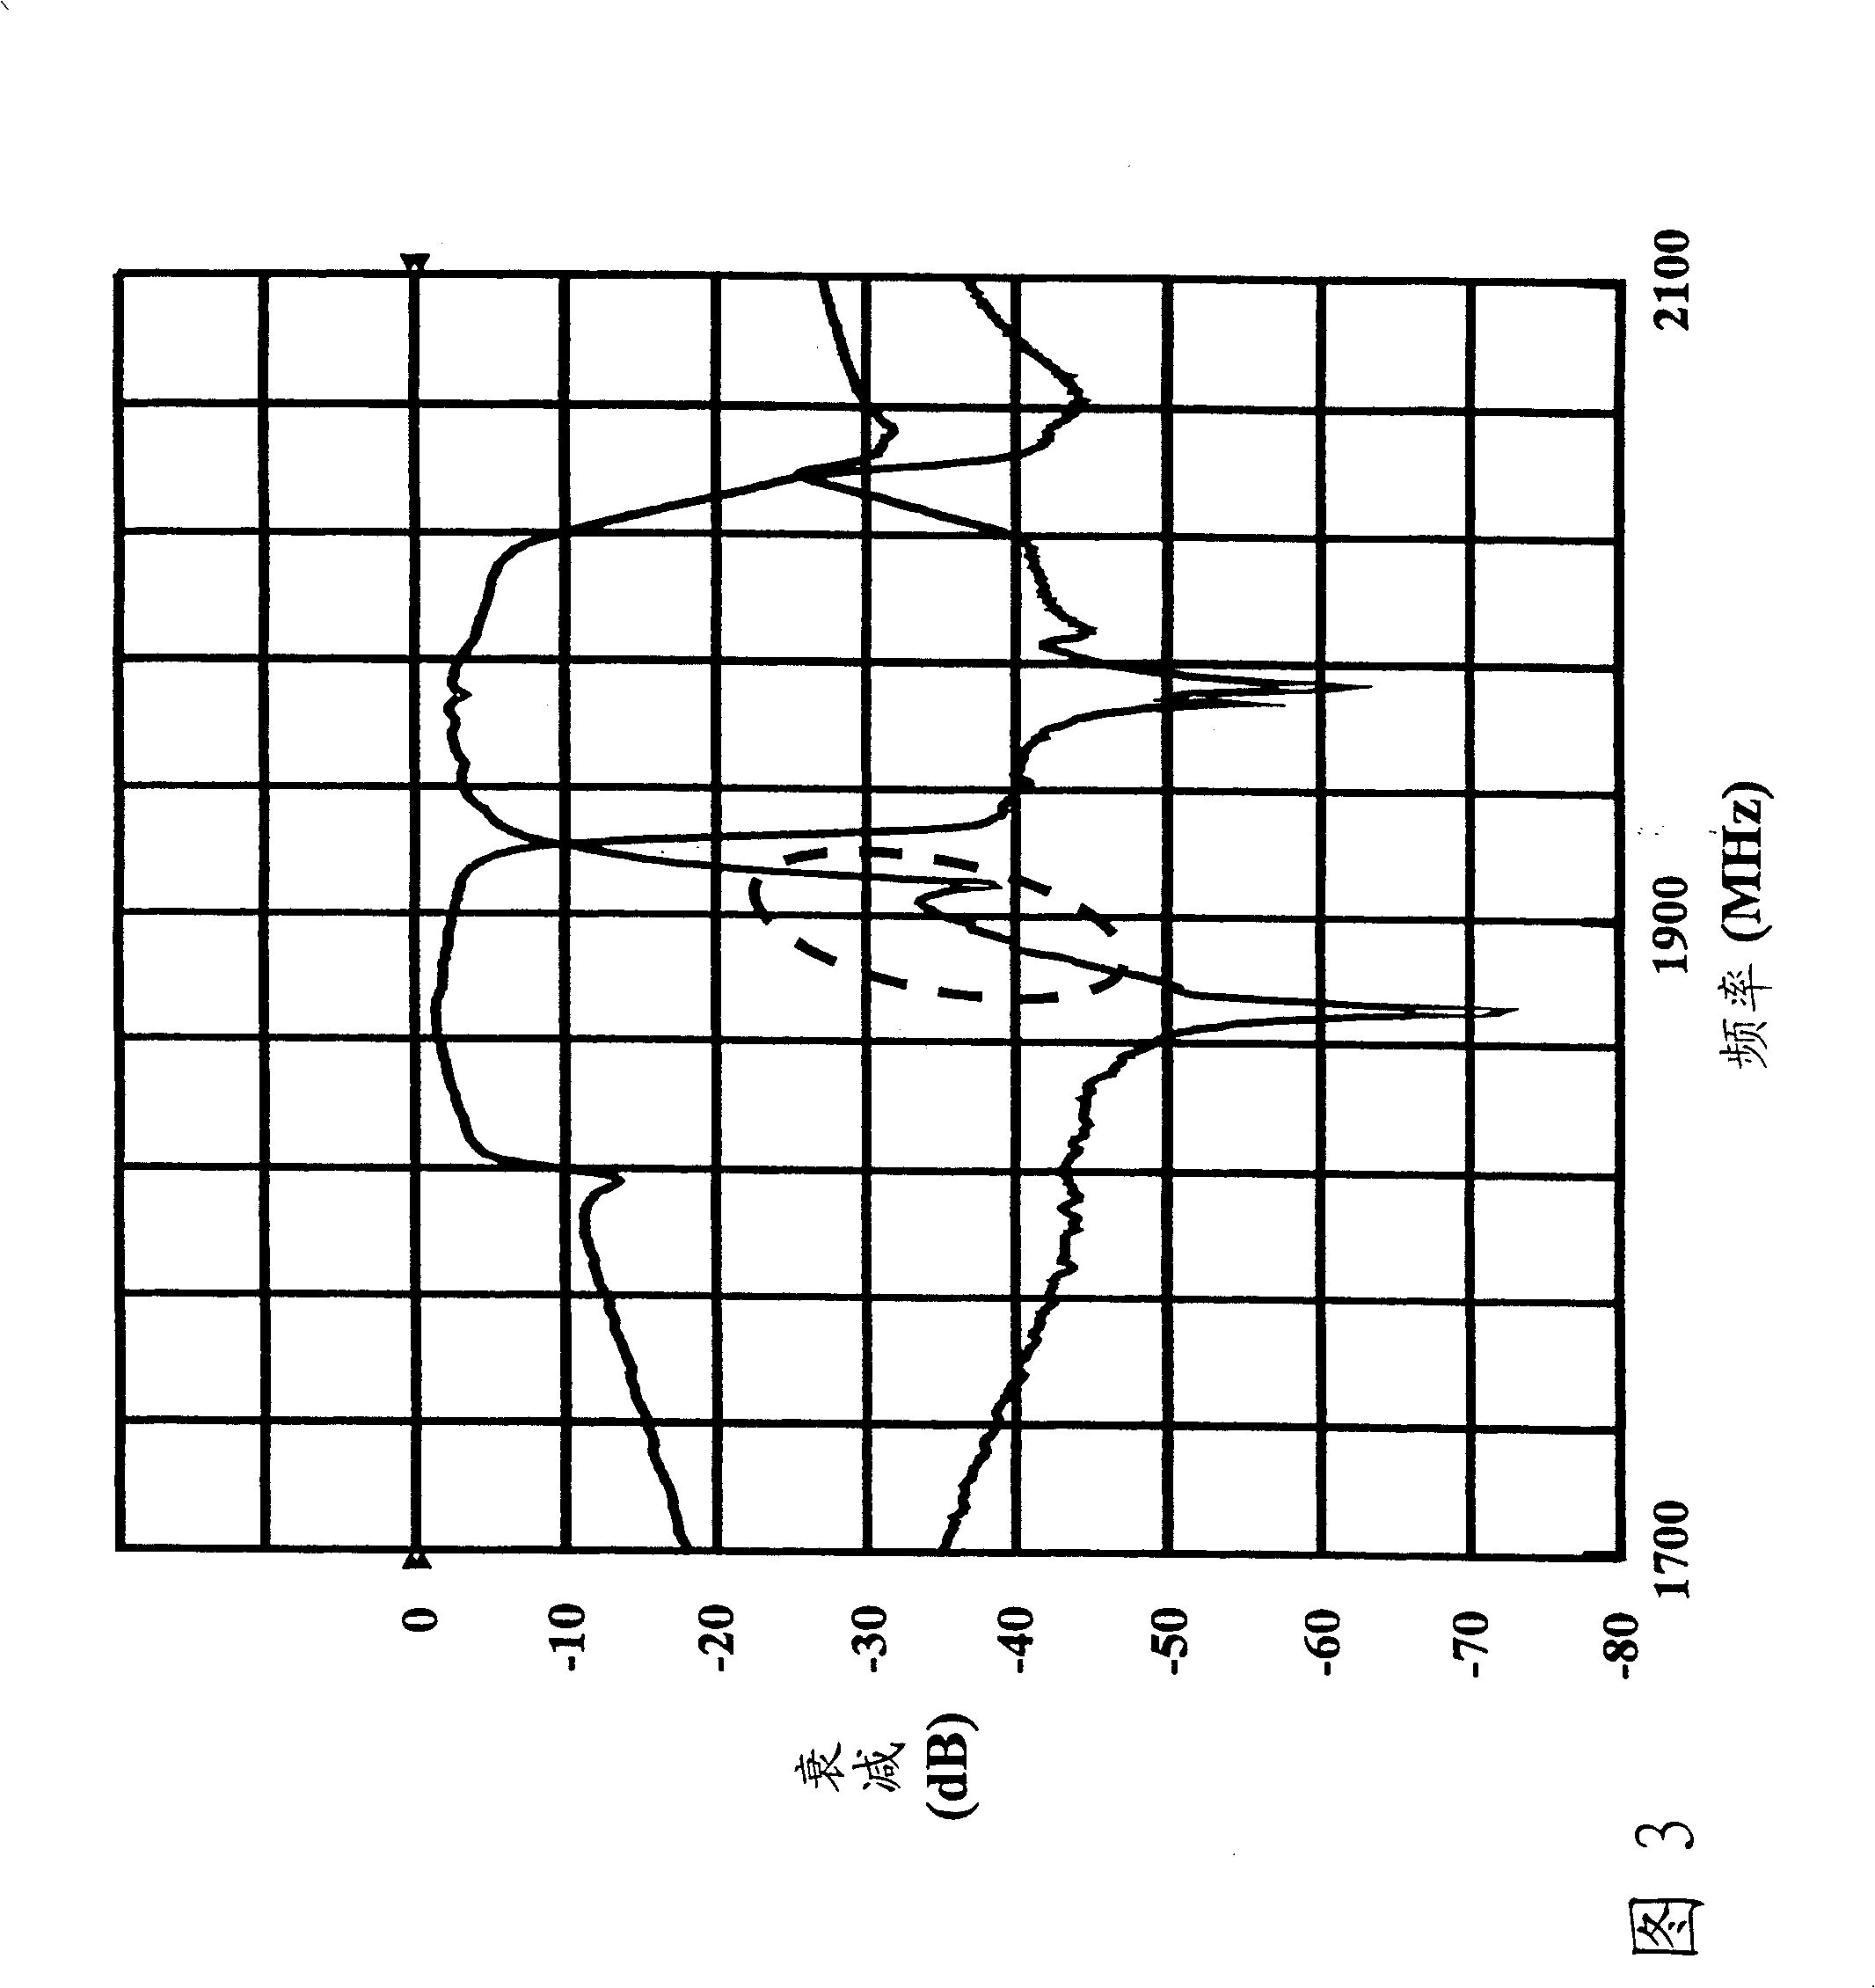 Duplexer and electronic apparatus using the same